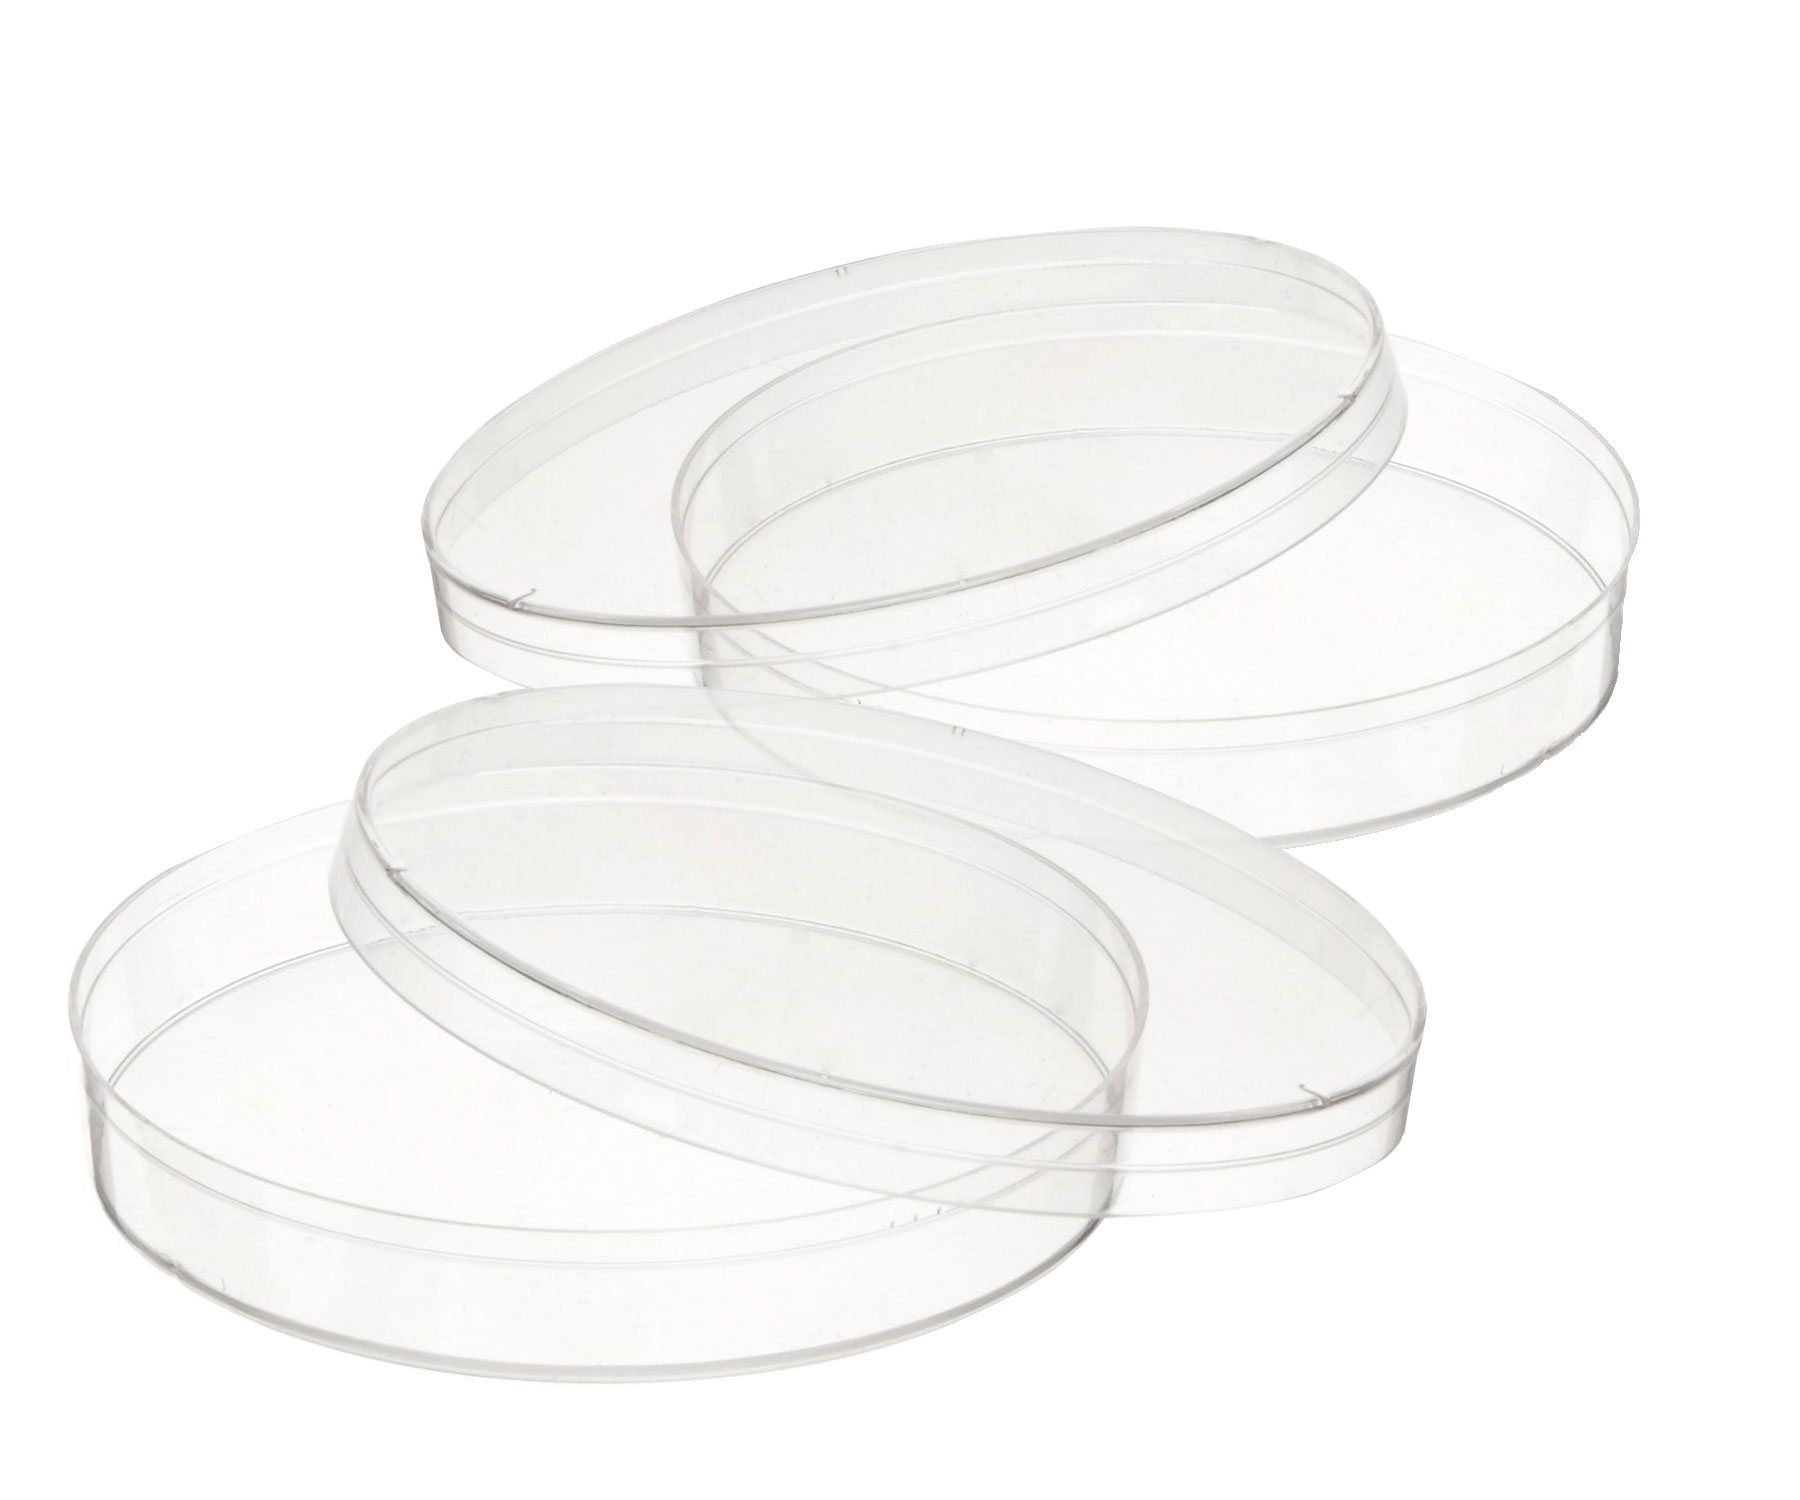 PETRI DISH 60 X 15MM STACKABLE STERILE SLEEVE/25